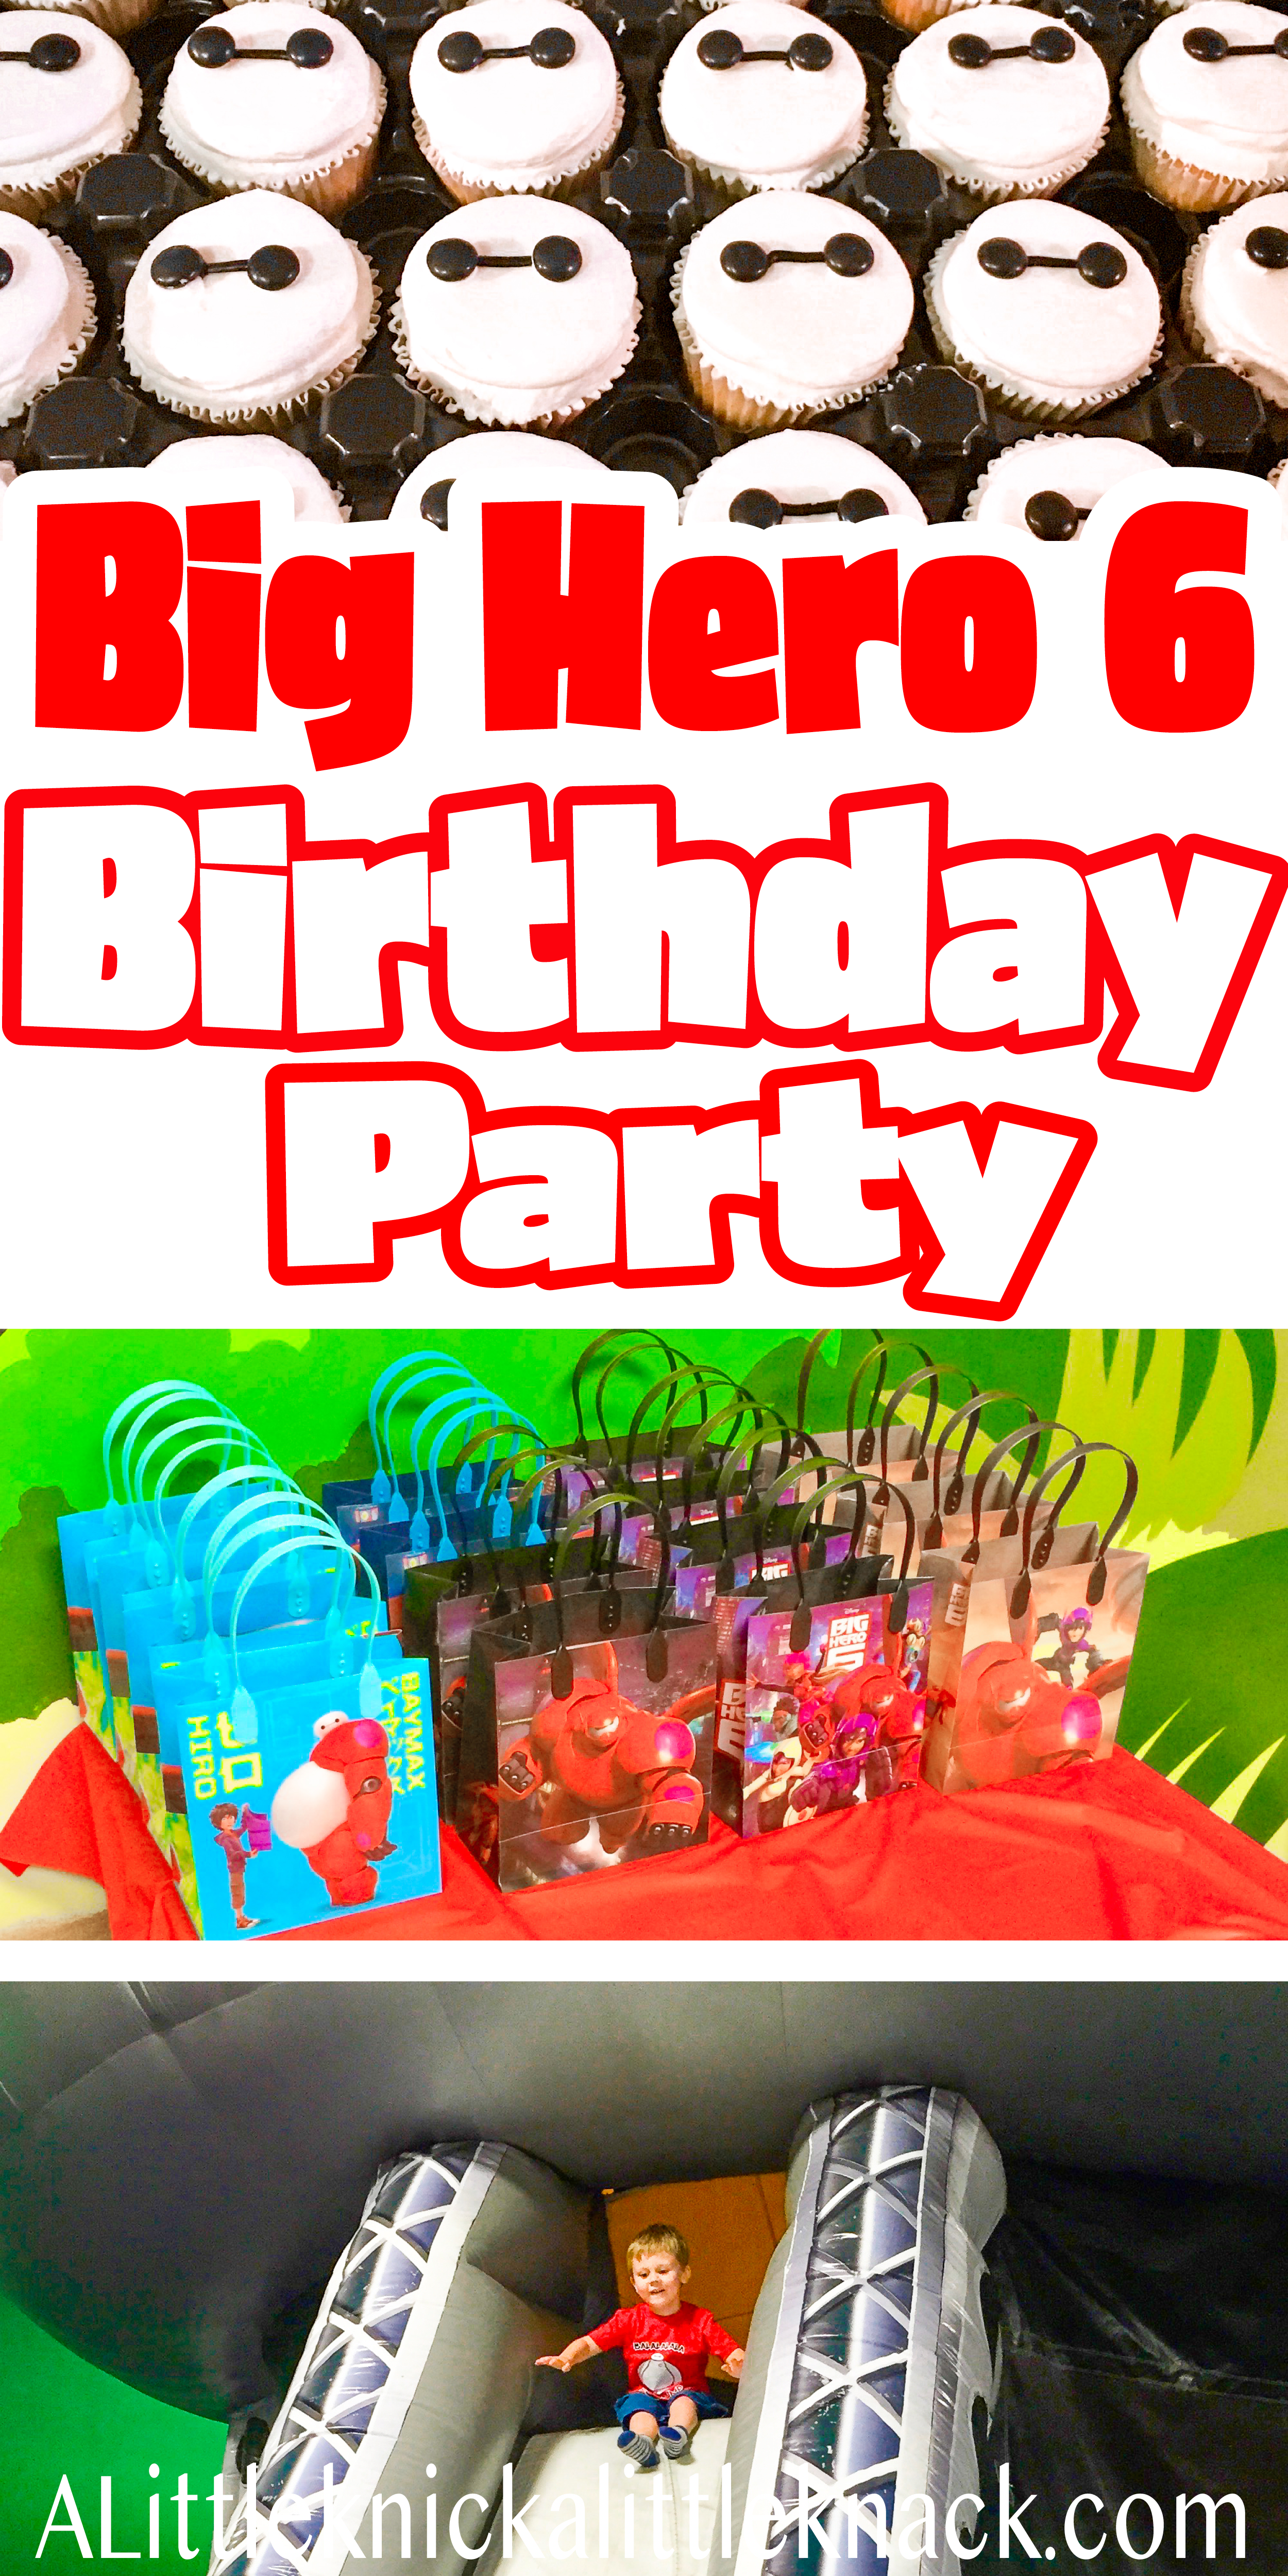 A Collage of Big Hero 6 Birthday party pictures with a text overlay.